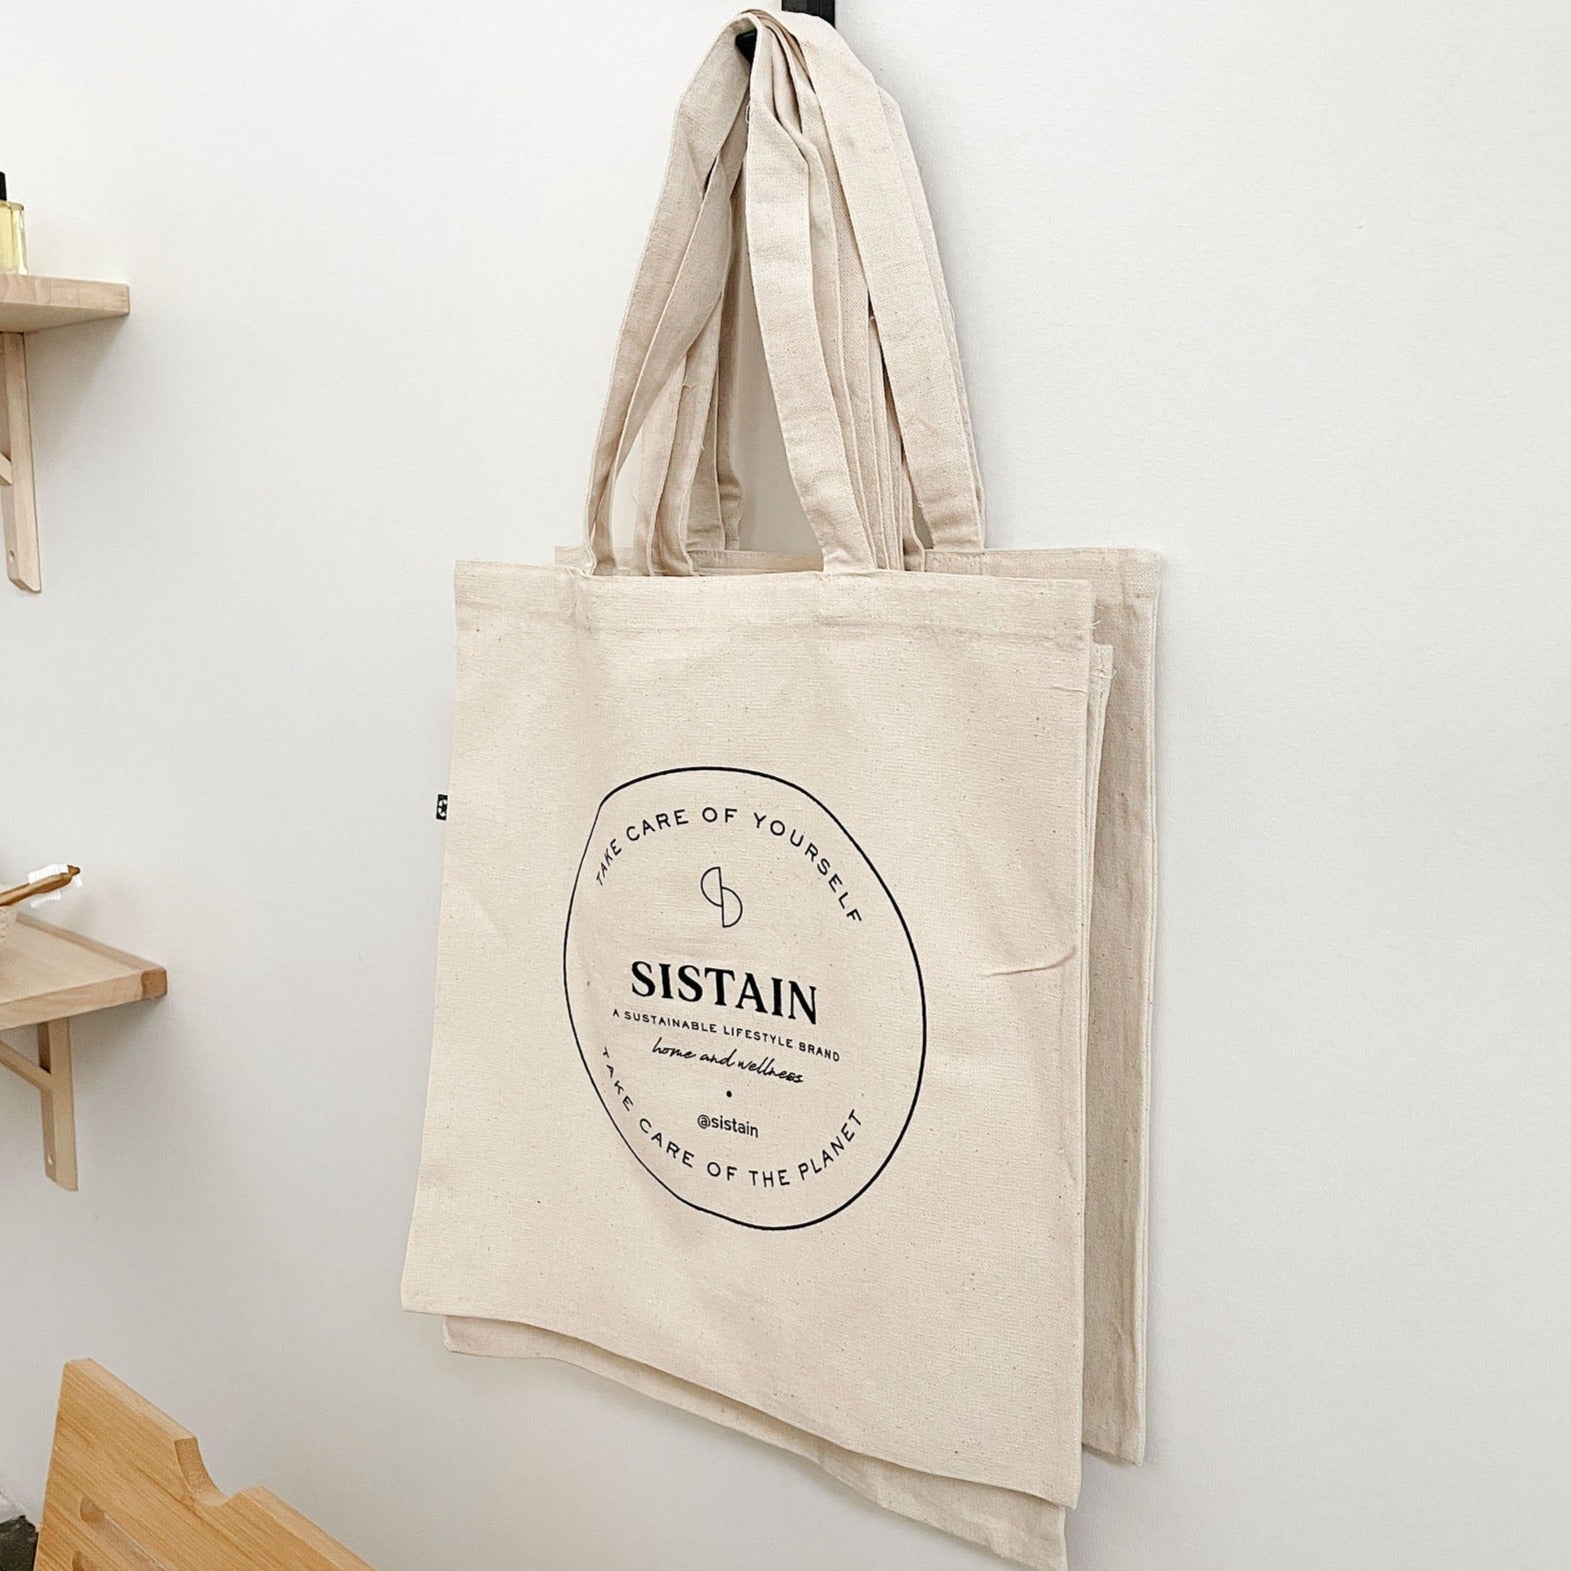 SISTAIN Tote